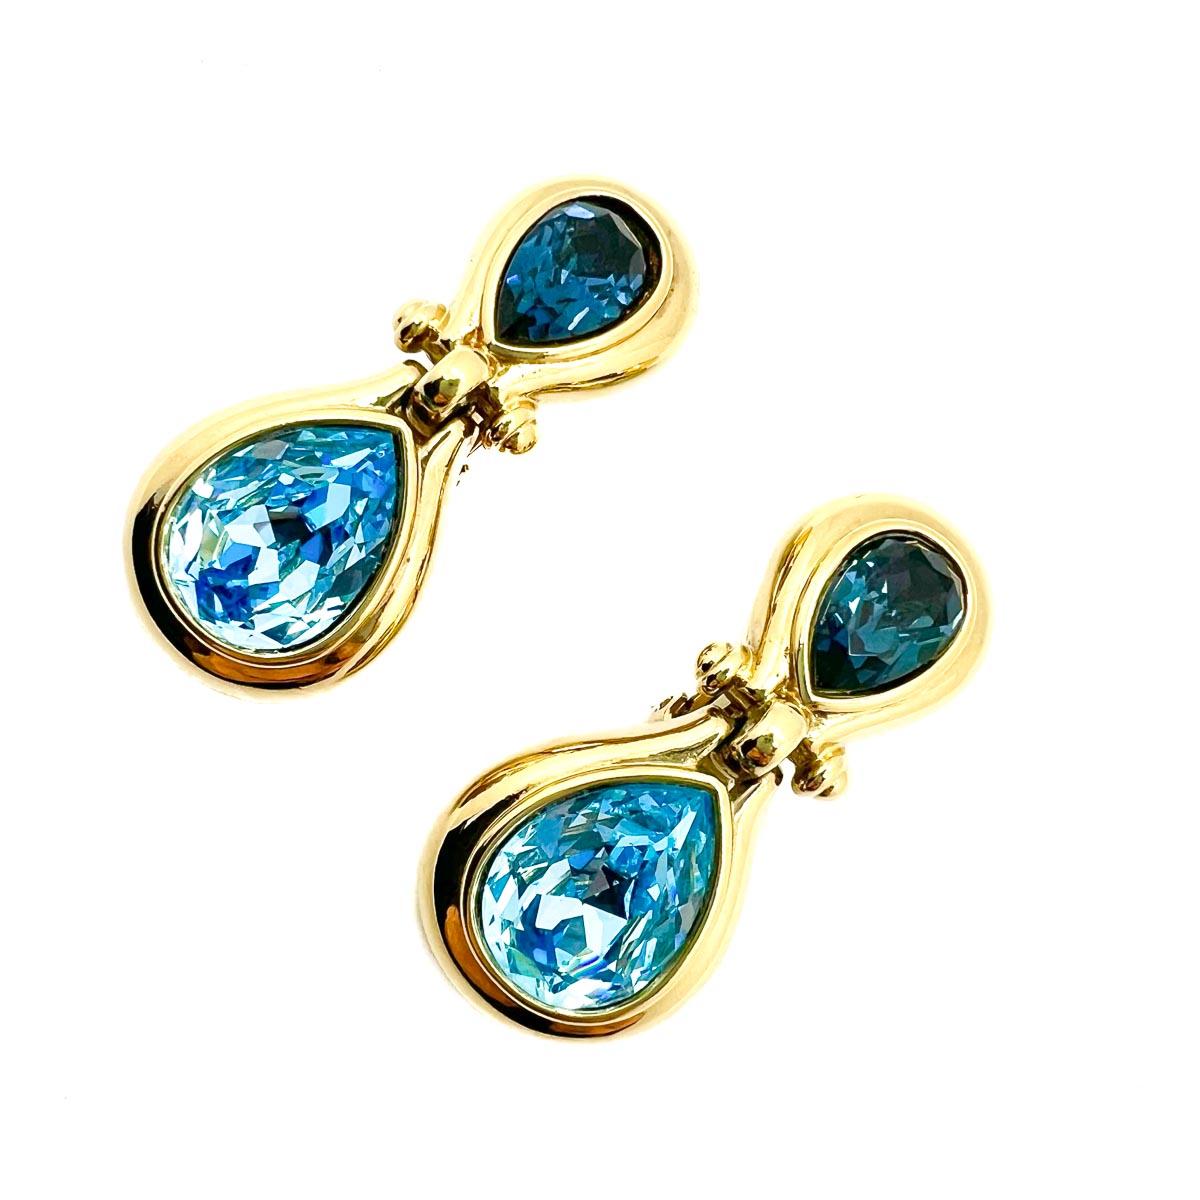 Vintage Grosse Sapphire & Aqua Crystal Droplet Earrings 1980s In Good Condition For Sale In Wilmslow, GB